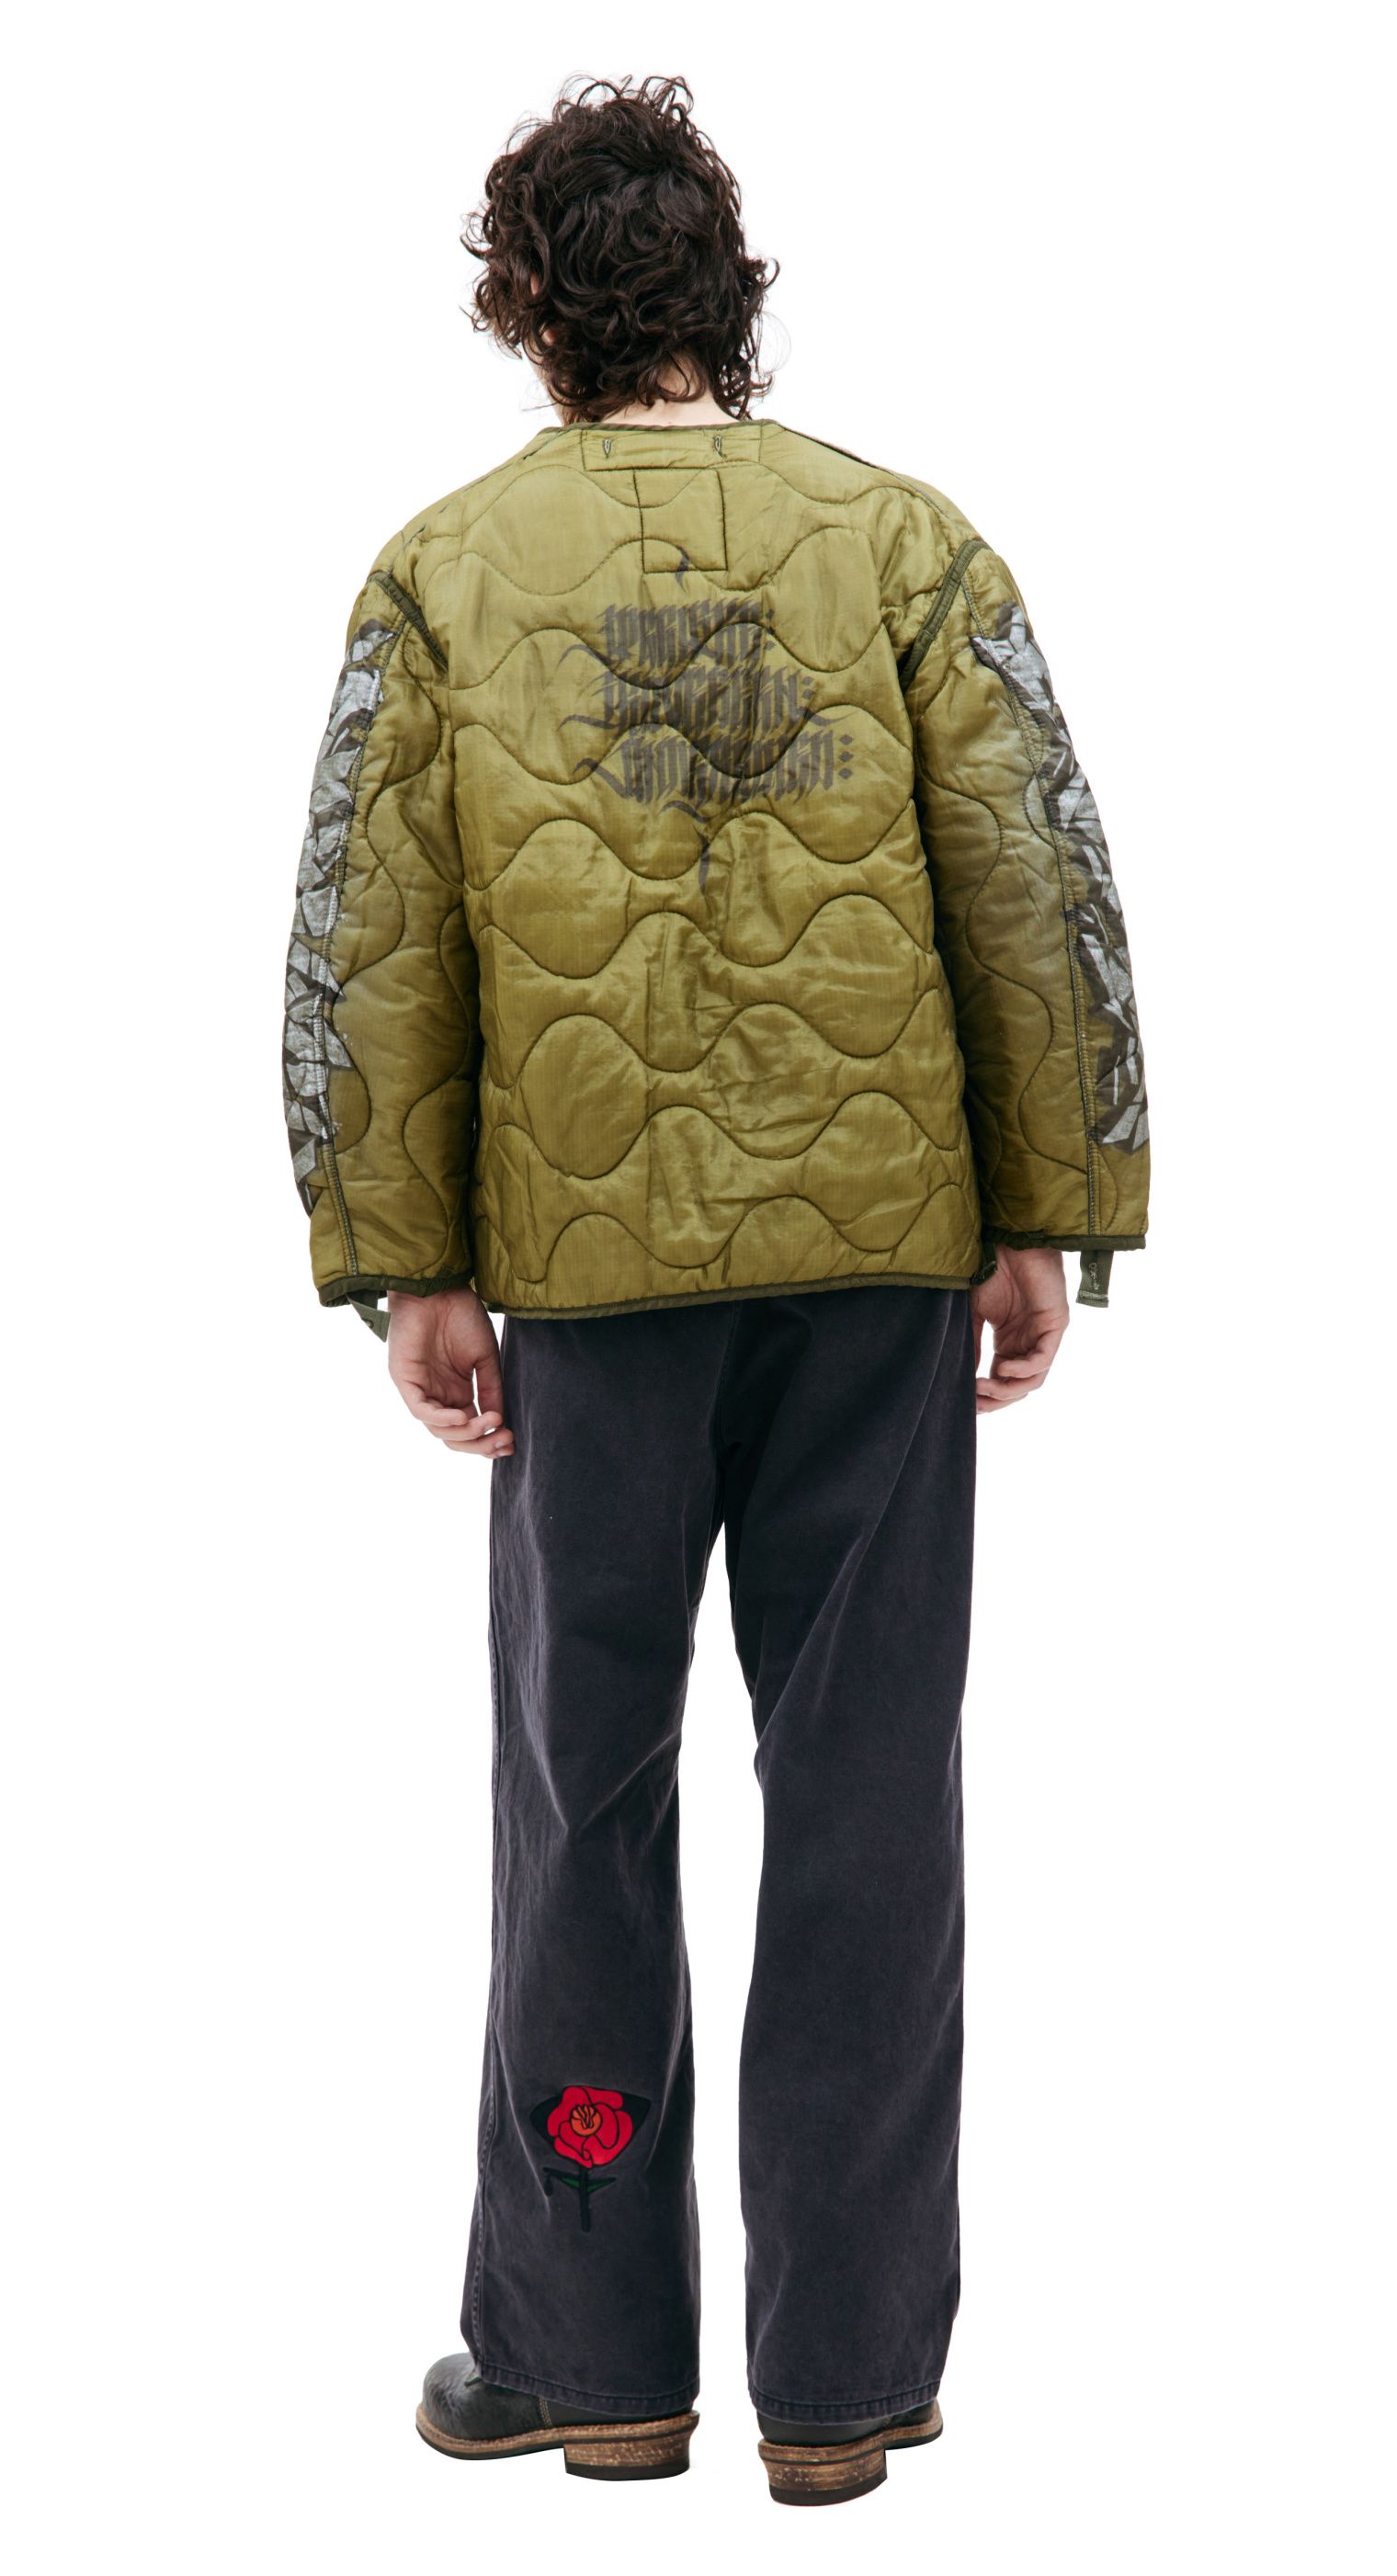 Children of the discordance Quilted jacket with graffiti print